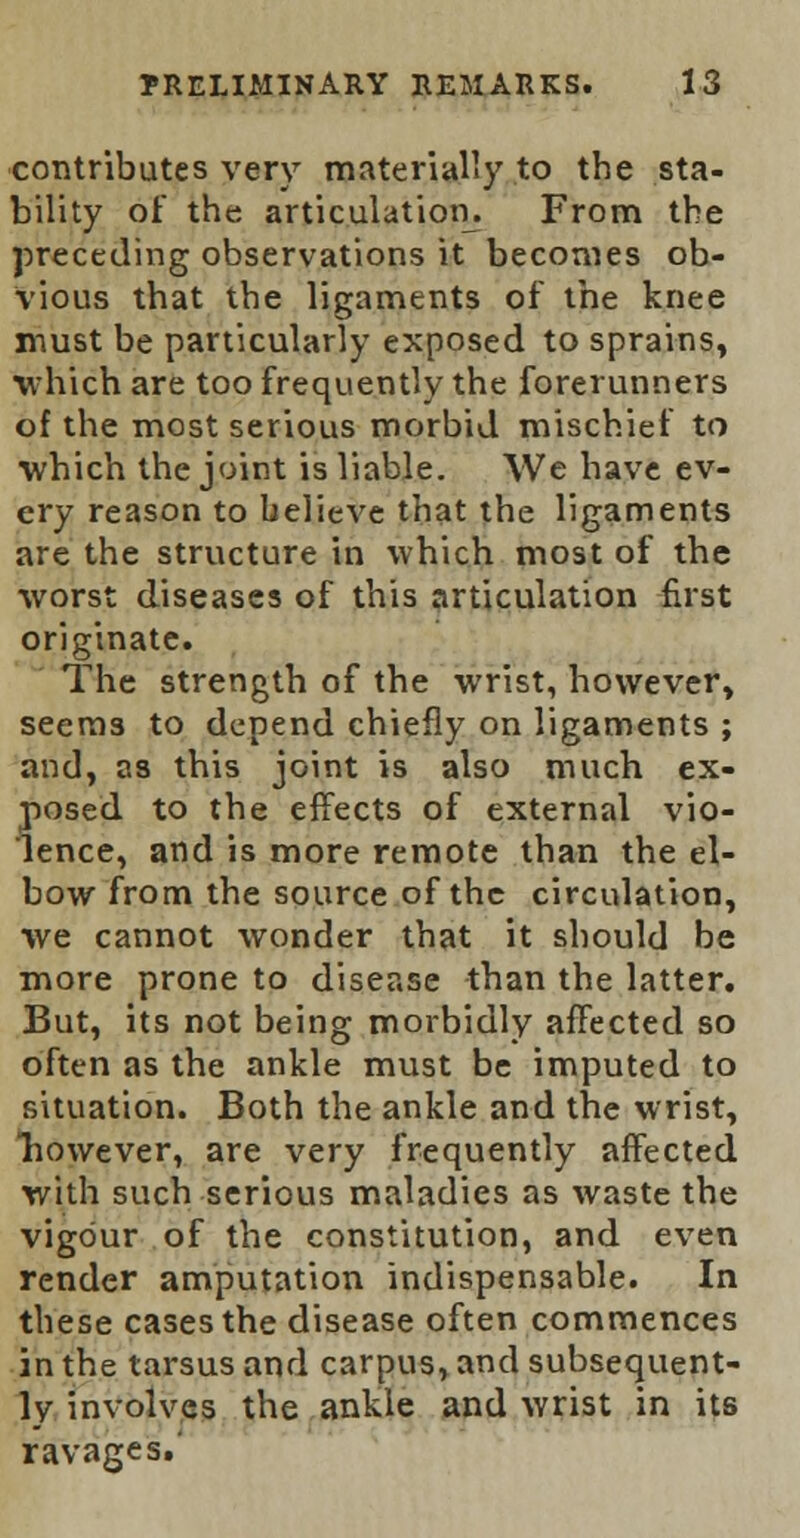 contributes very materially to the sta- bility of the articulation. From the preceding observations it becomes ob- vious that the ligaments of the knee must be particularly exposed to sprains, which are too frequently the forerunners of the most serious morbid mischief to which the joint is liable. We have ev- ery reason to believe that the ligaments are the structure in which most of the worst diseases of this articulation first originate. The strength of the wrist, however, seems to depend chiefly on ligaments ; and, as this joint is also much ex- posed to the effects of external vio- lence, and is more remote than the el- bow from the source of the circulation, we cannot wonder that it should be more prone to disease than the latter. But, its not being morbidly affected so often as the ankle must be imputed to situation. Both the ankle and the wrist, Tiowever, are very frequently affected with such serious maladies as waste the vigour of the constitution, and even render amputation indispensable. In these cases the disease often commences in the tarsus and carpus, and subsequent- ly involves the ankle and wrist in its ravages.'